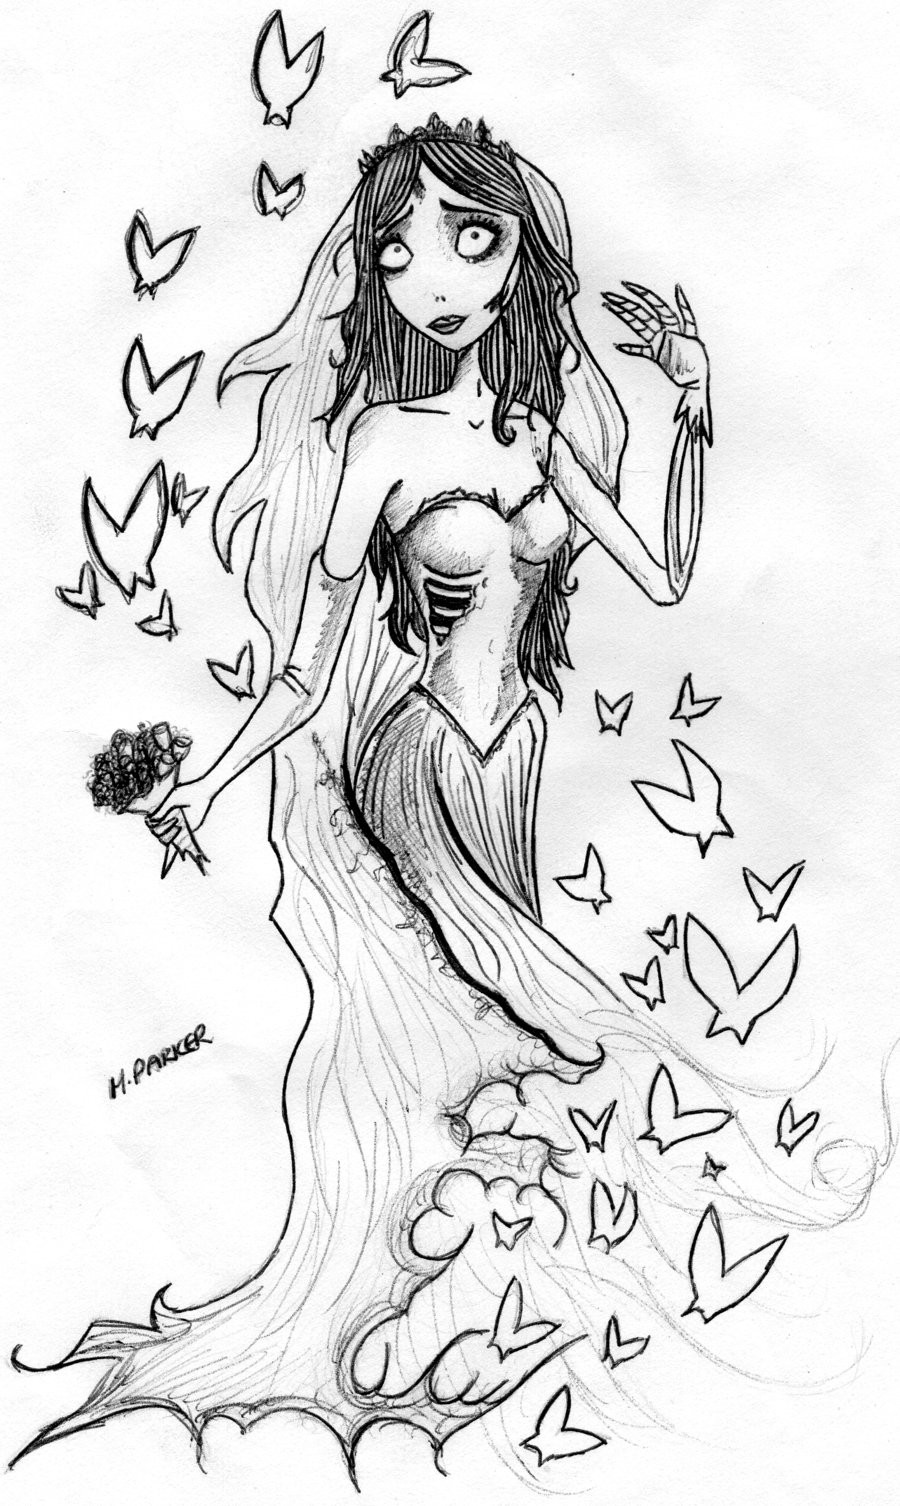 Corpse Bride Coloring Pages
 The Corpse Bride Free Colouring Pages